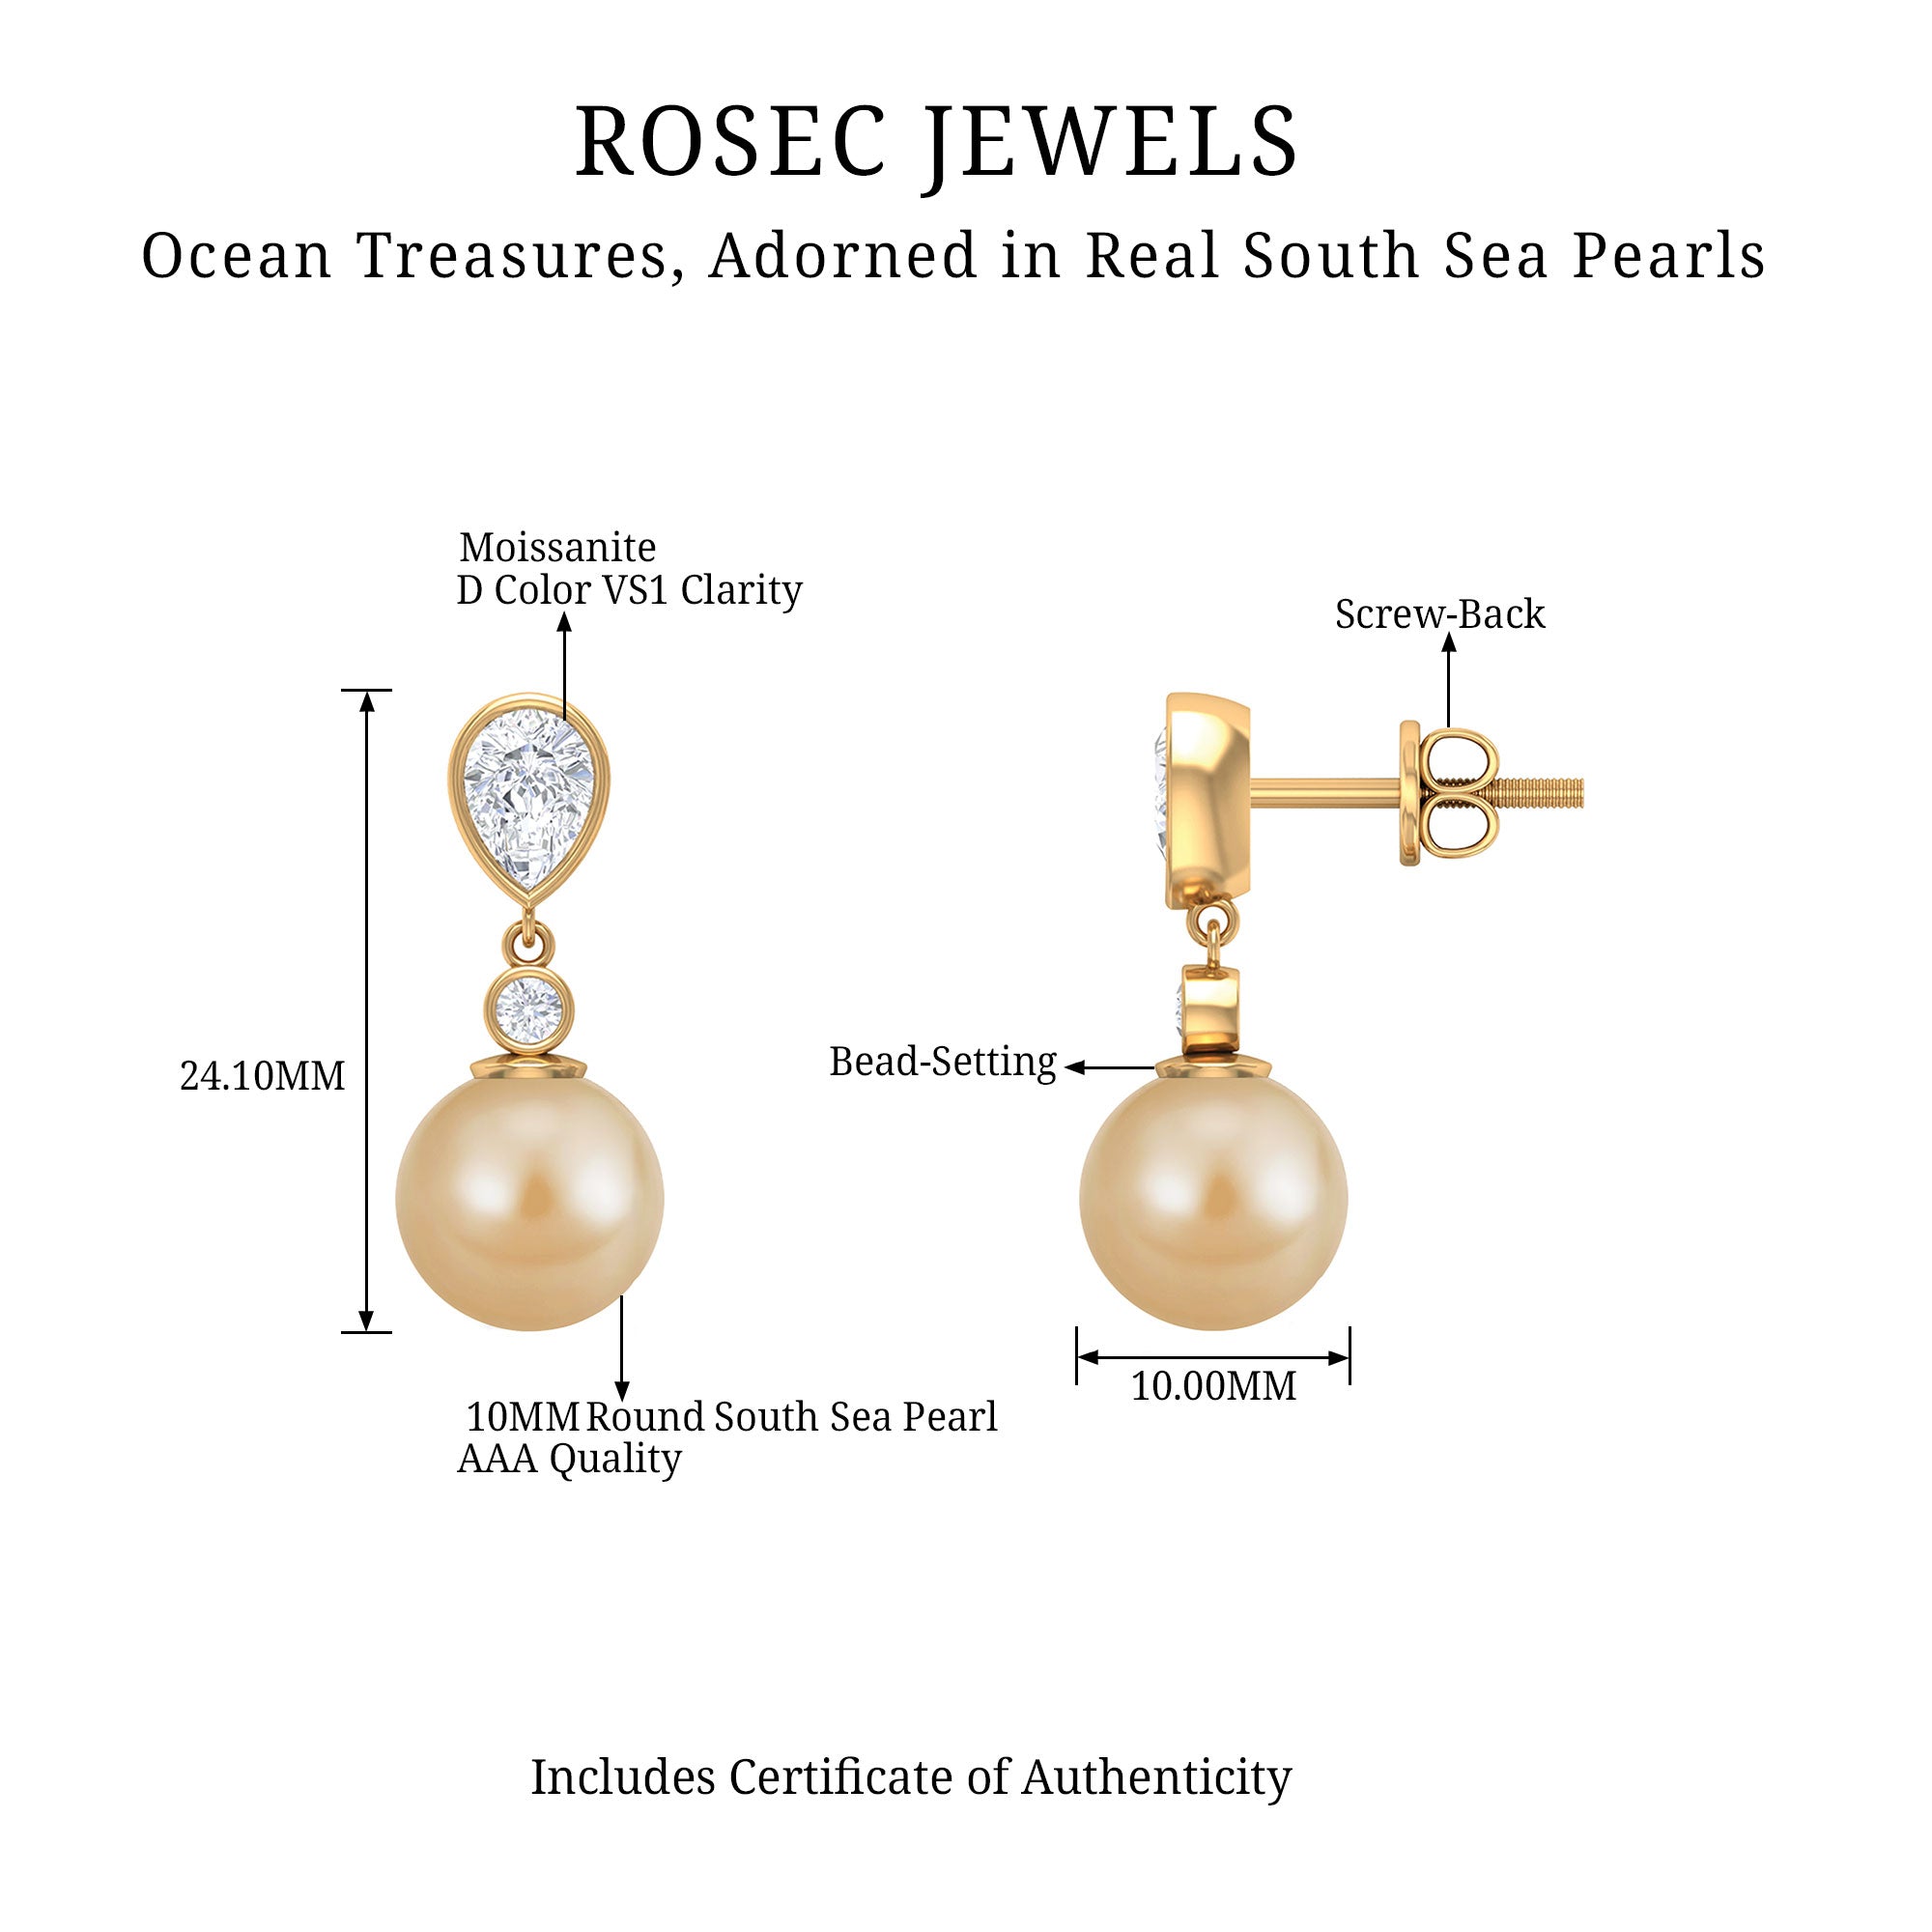 16.75 CT South Sea Pearl Drop Earrings with Moissanite South Sea Pearl - ( AAA ) - Quality - Rosec Jewels